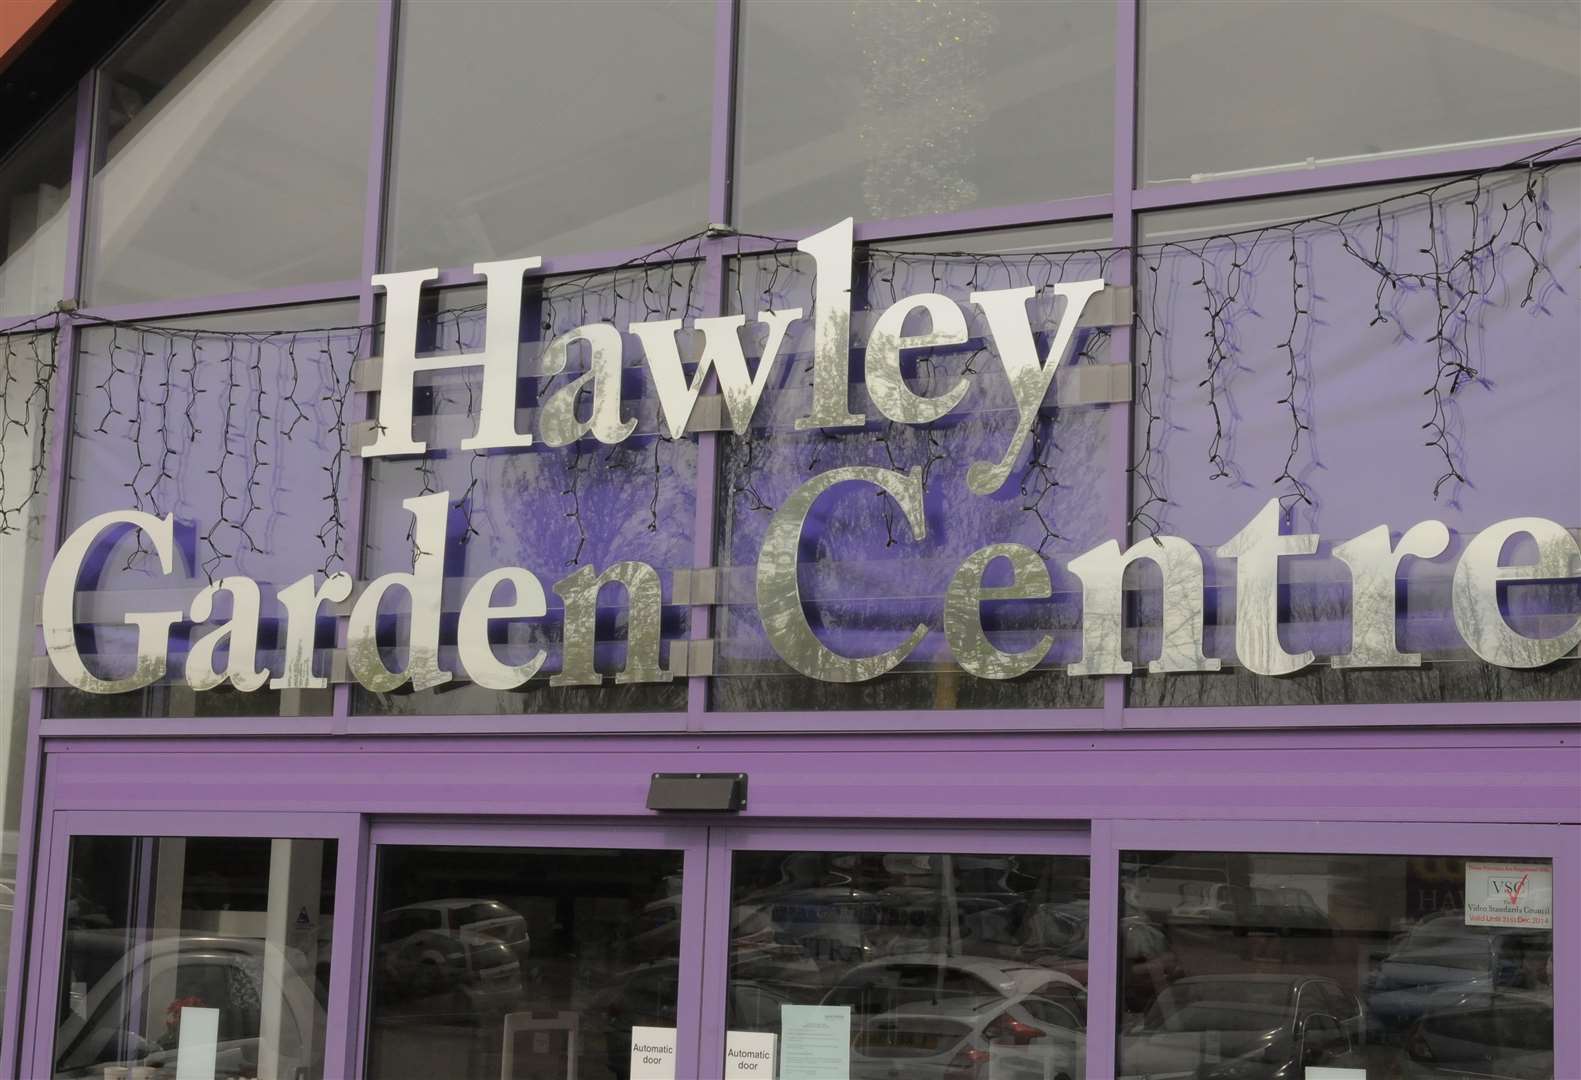 The aquatics centre is located on site but separate to Hawley Garden Centre, Hawley Road, Hawley. Picture: Steve Crispe